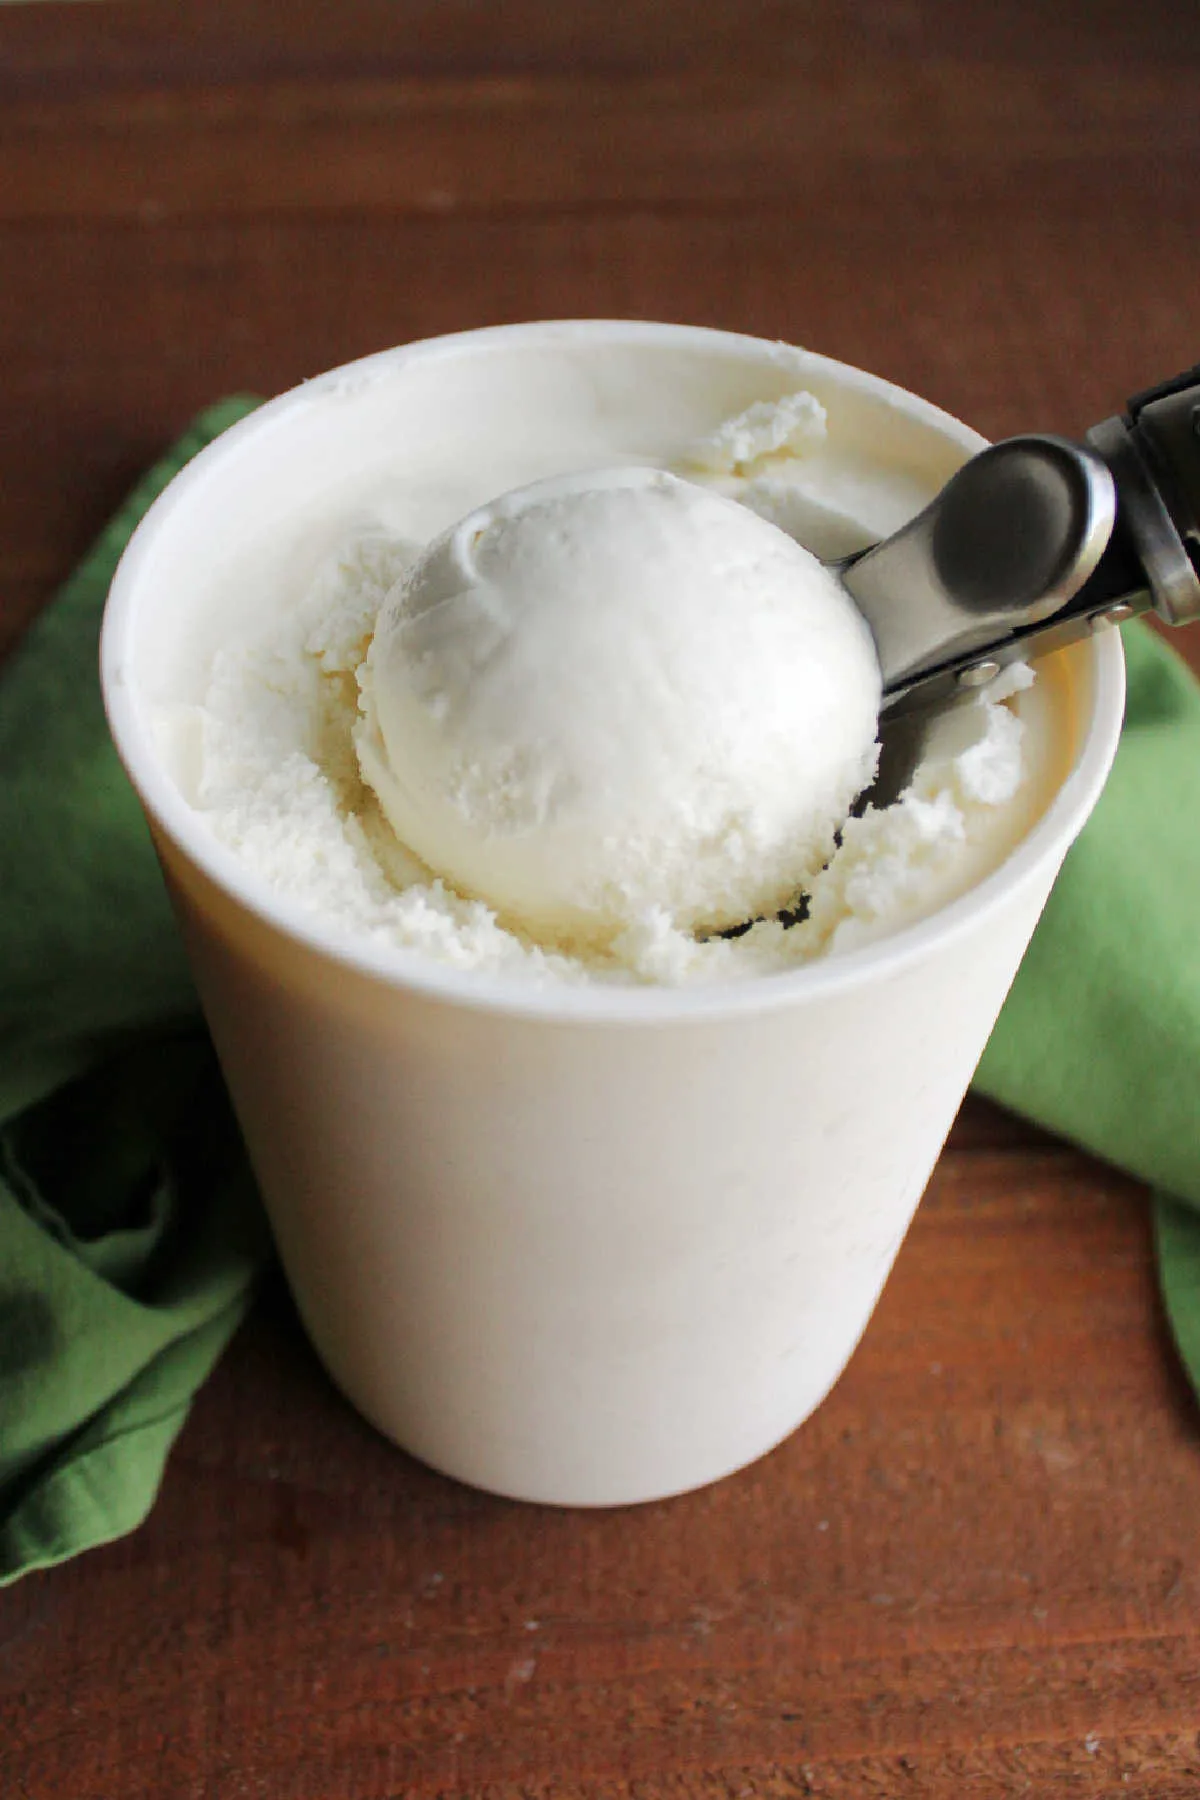 Ice cream scoop getting ball of key lime ice cream from quart storage container.